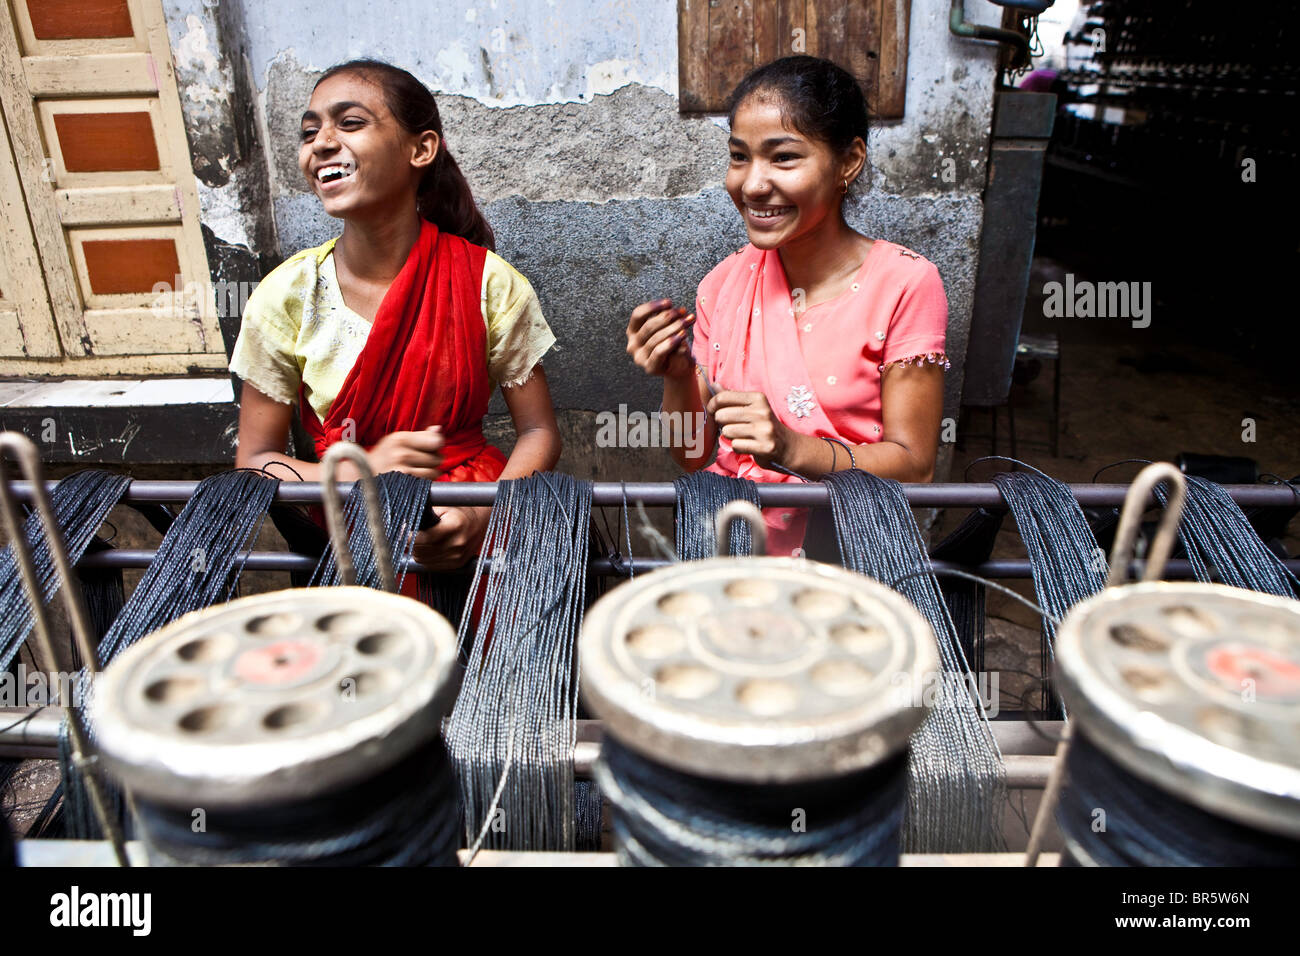 Two young women making plastic string in the city of Bhavnagar, Gujarati State. Child labour is common in this area. Stock Photo